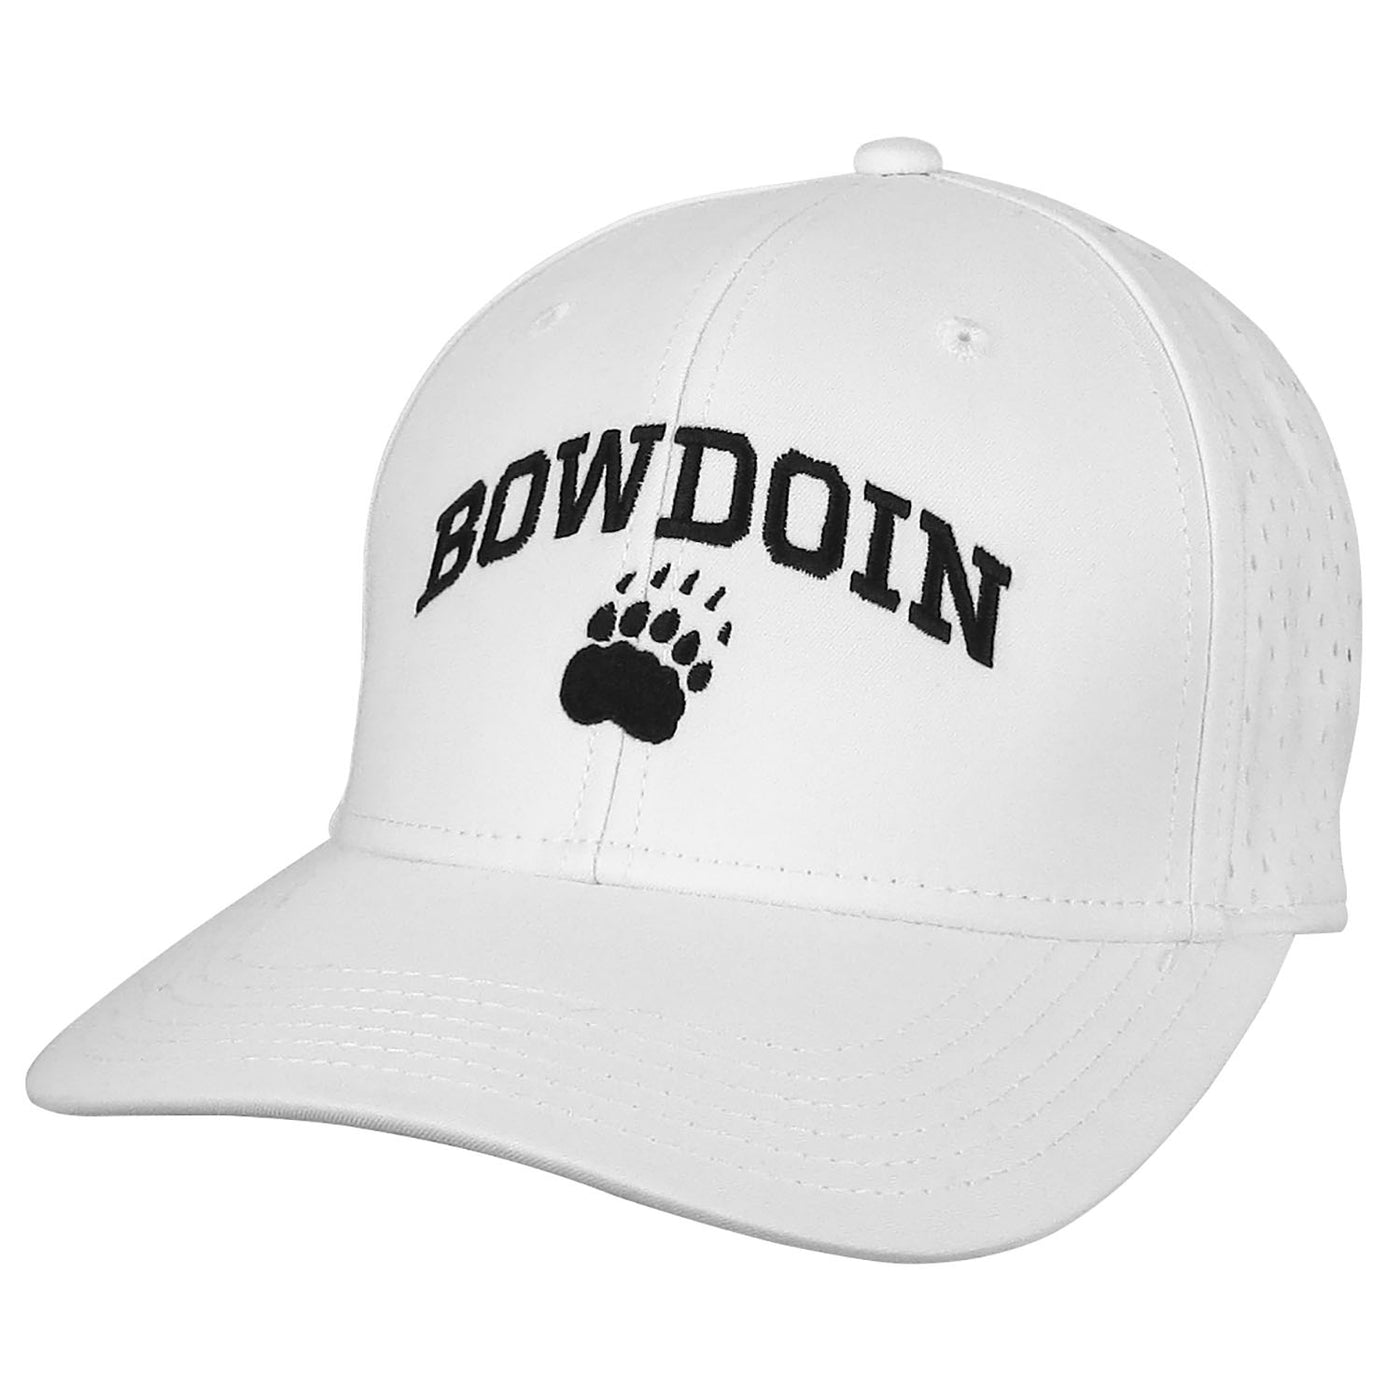 Reclaim Store from Hat with Bowdoin – Legacy Bowdoin and Mid-Pro Paw The